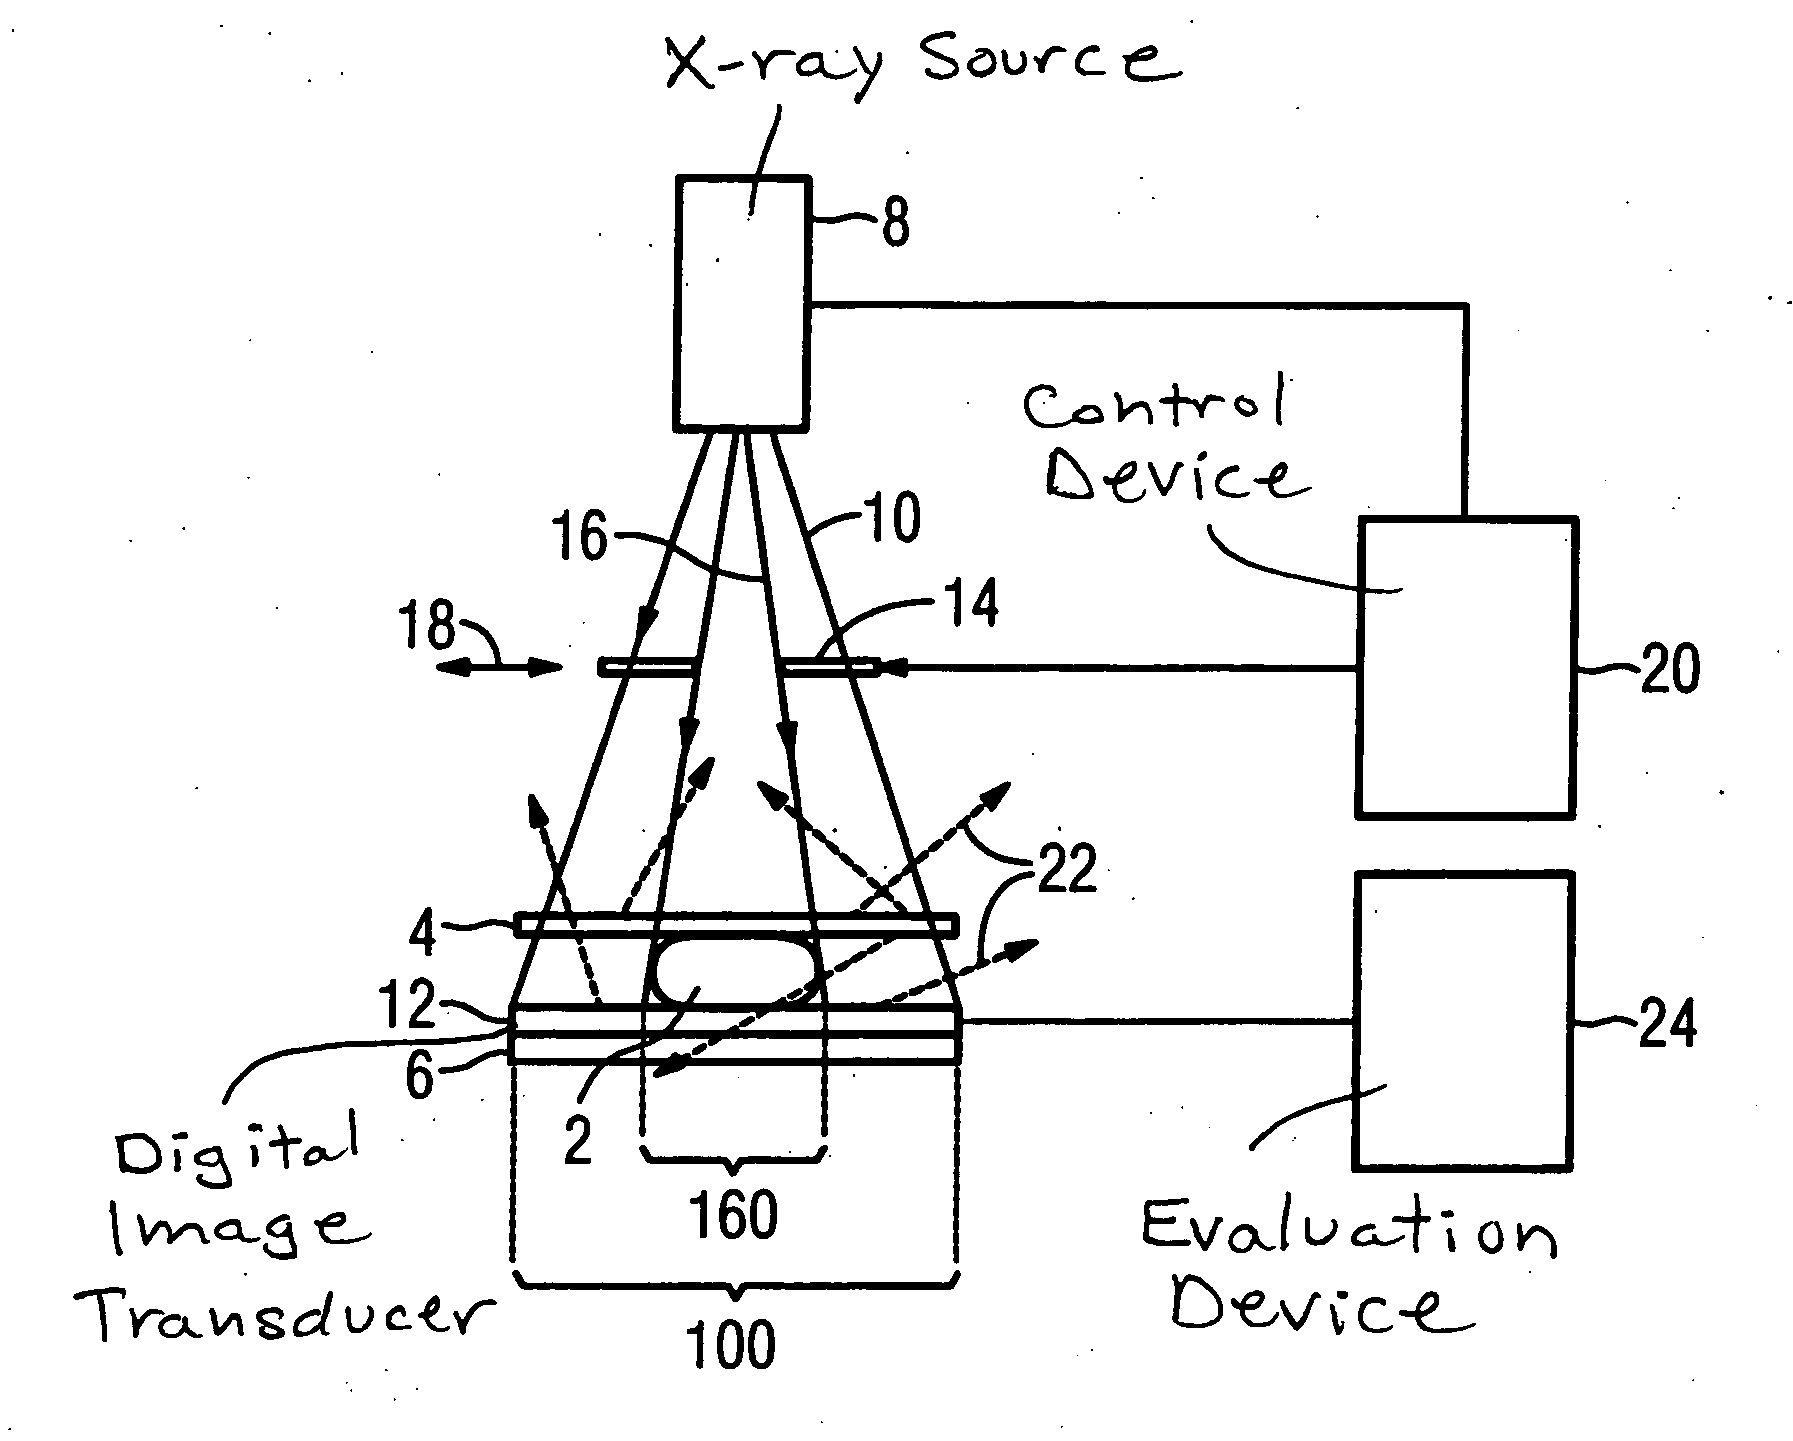 Method and apparatus to generate an x-ray image of the female breast